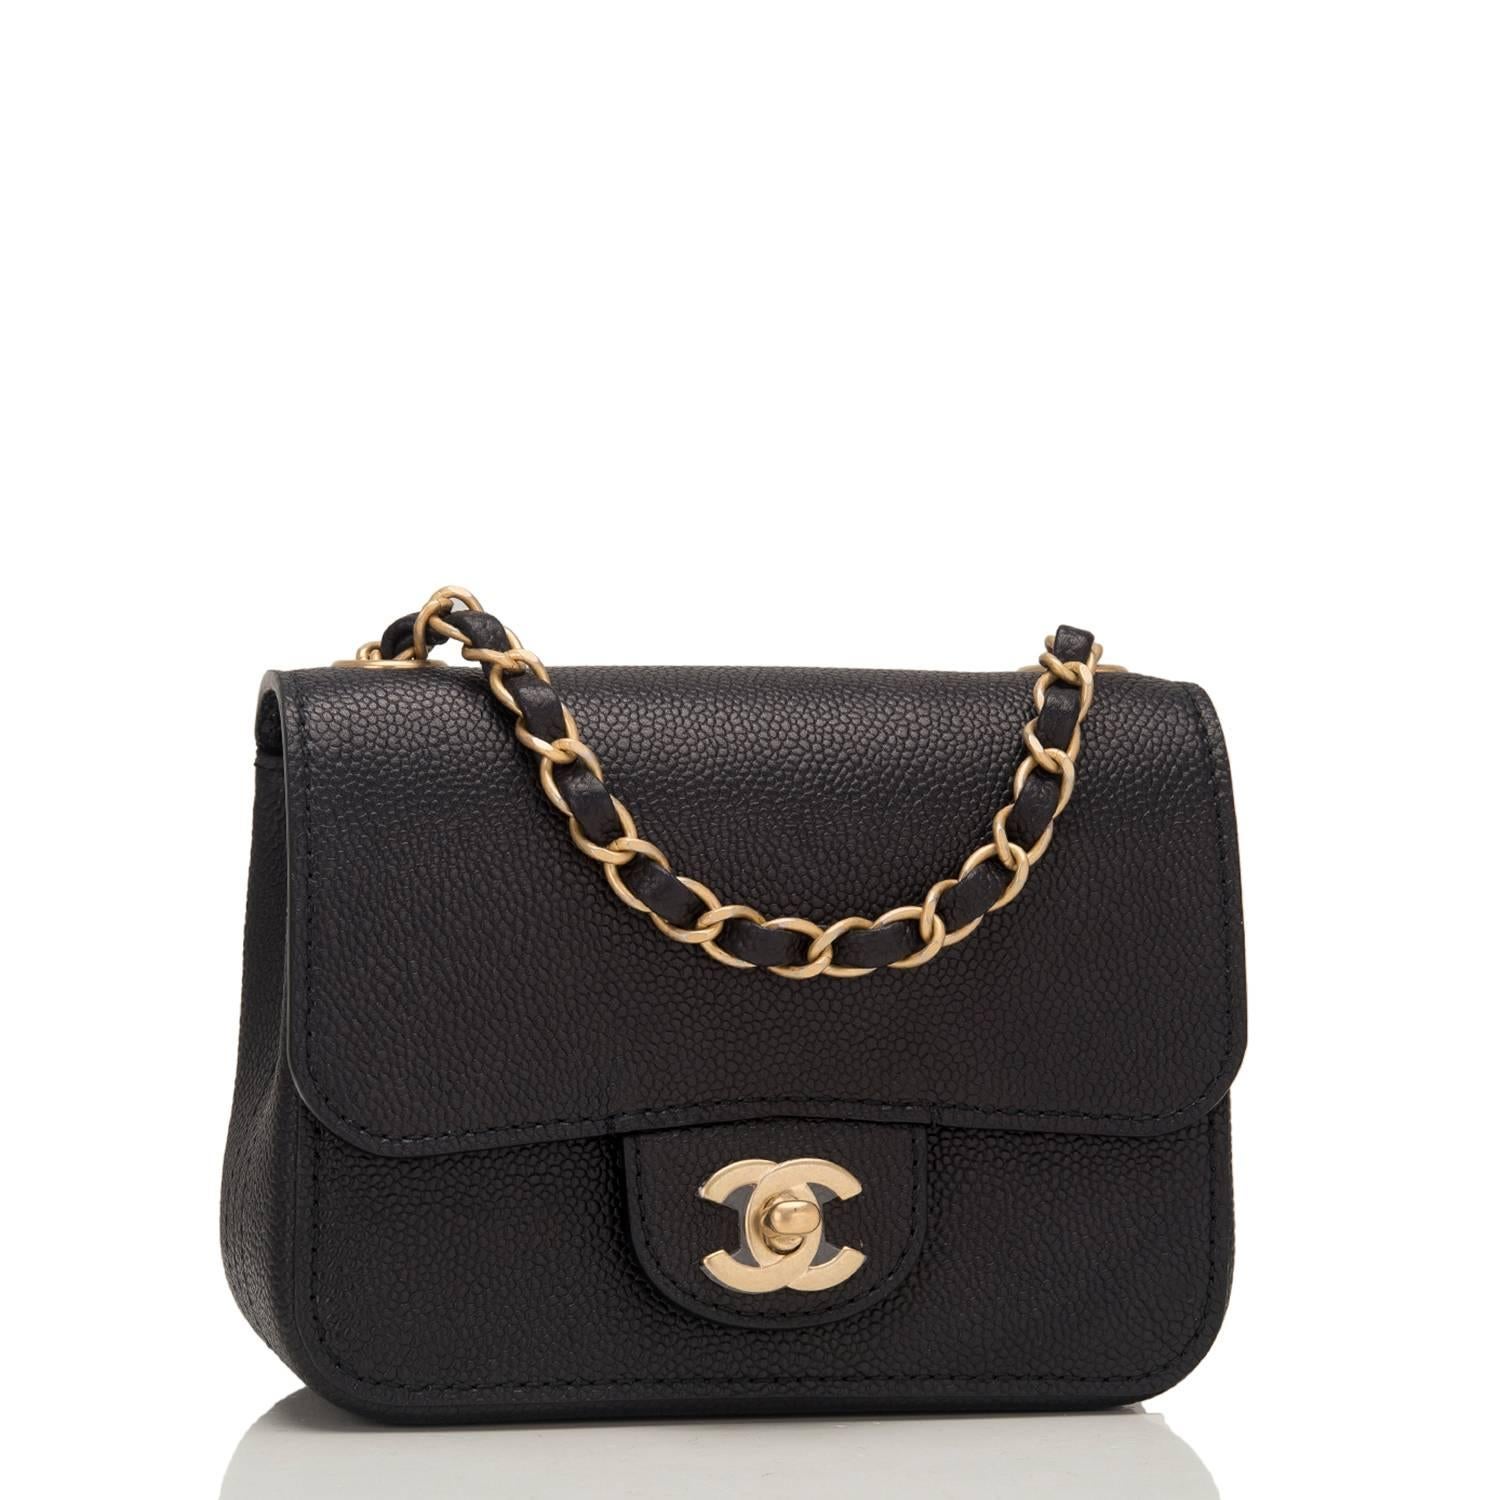 Chanel Square Mini Classic flap bag of black caviar leather with gold tone hardware.

This bag has a front flap with CC turnlock closure, a half moon back pocket, and an interwoven chain link with black leather shoulder/crossbody strap.

The